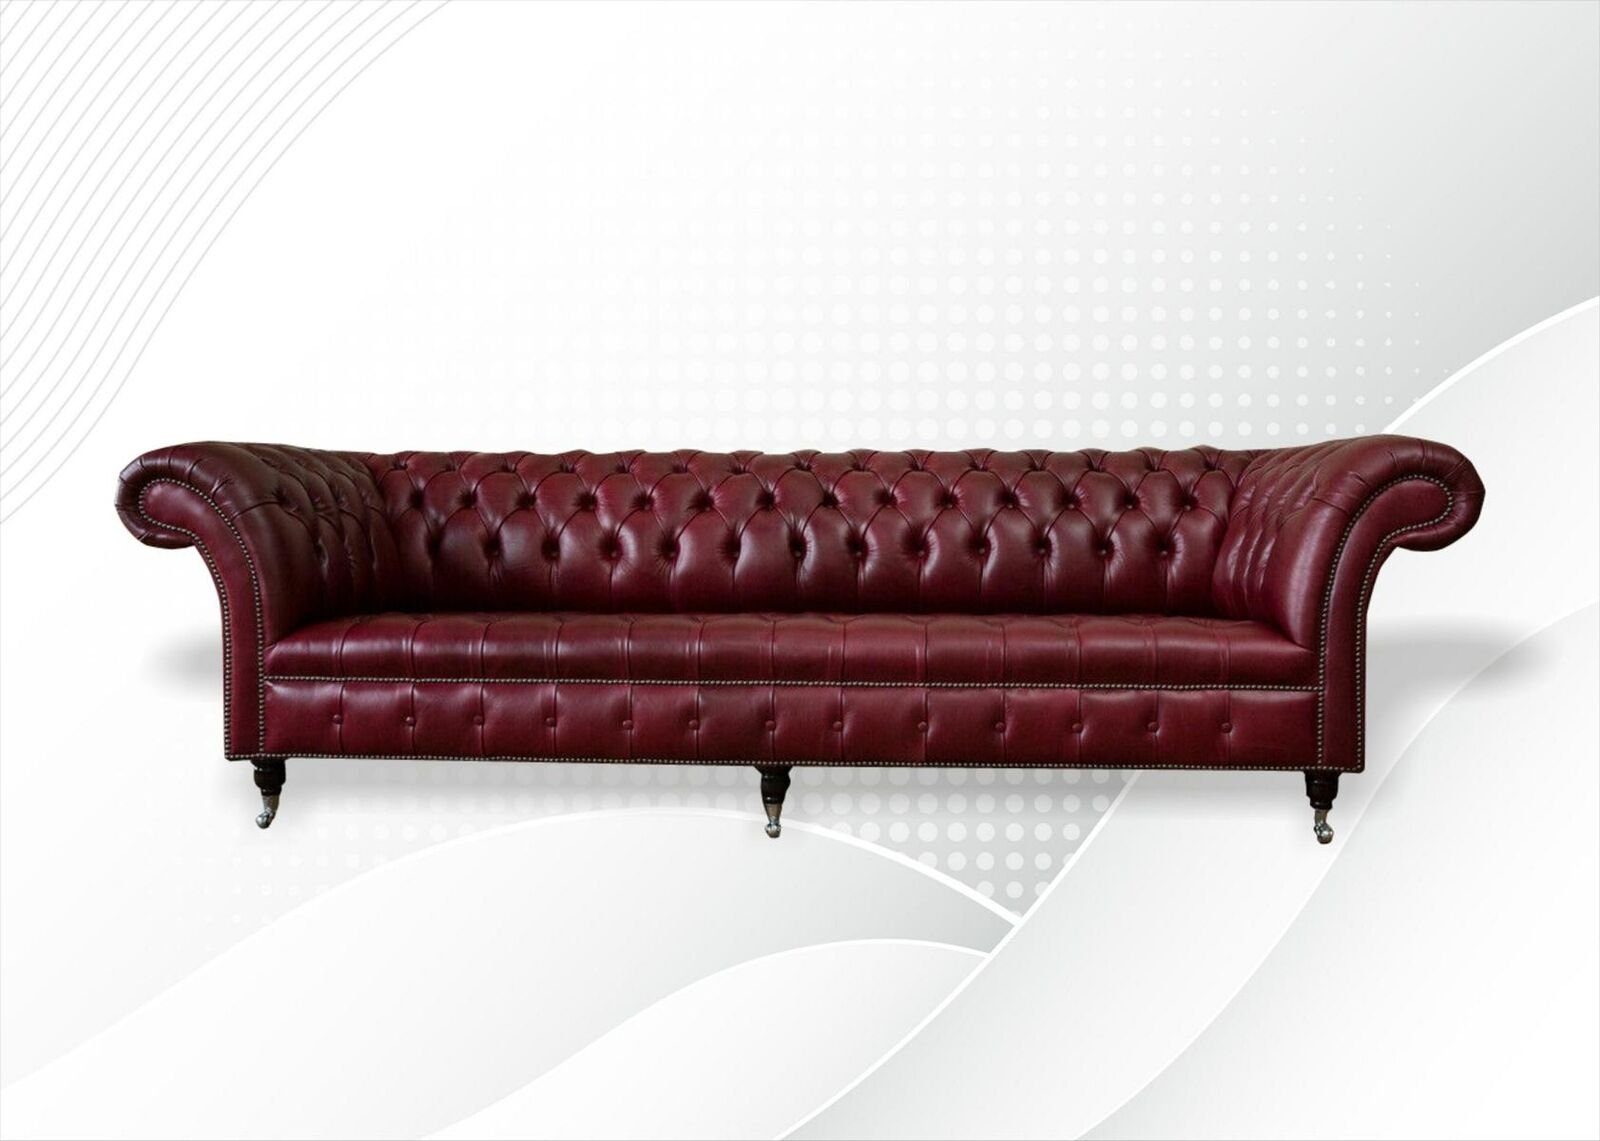 JVmoebel Chesterfield-Sofa Bordeaux Big Sofa Couch Chesterfield 265cm Sofa 100% Leder Sofort, 1 Teile, Made in Europa